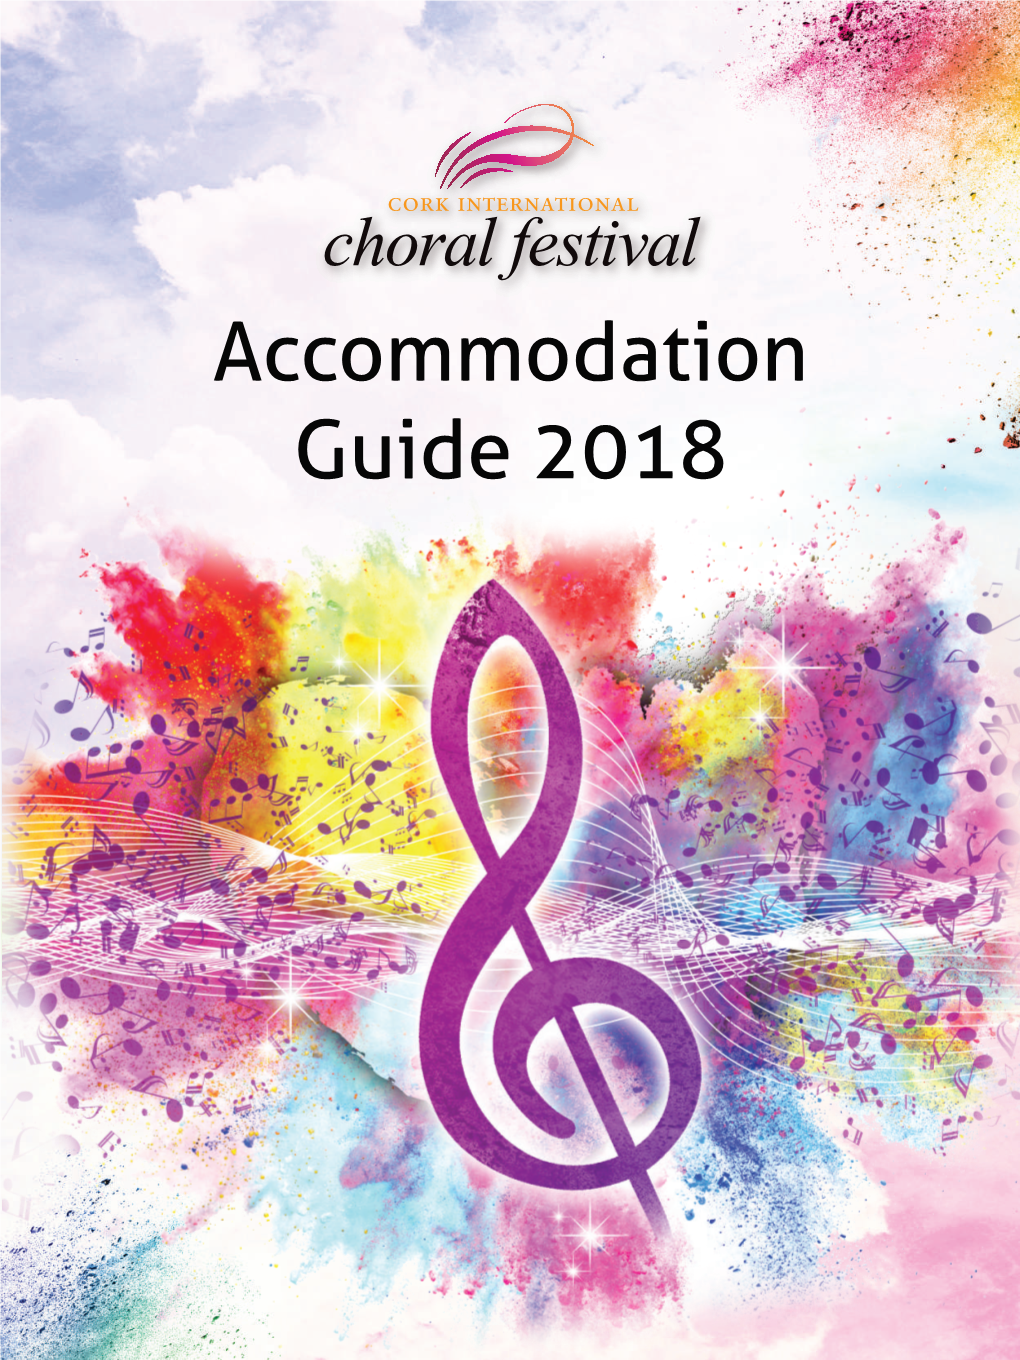 Accommodation Guide 2018 Clayton Hotel Cork City (Formally the Clarion Hotel Cork) Festival Hotel Partner